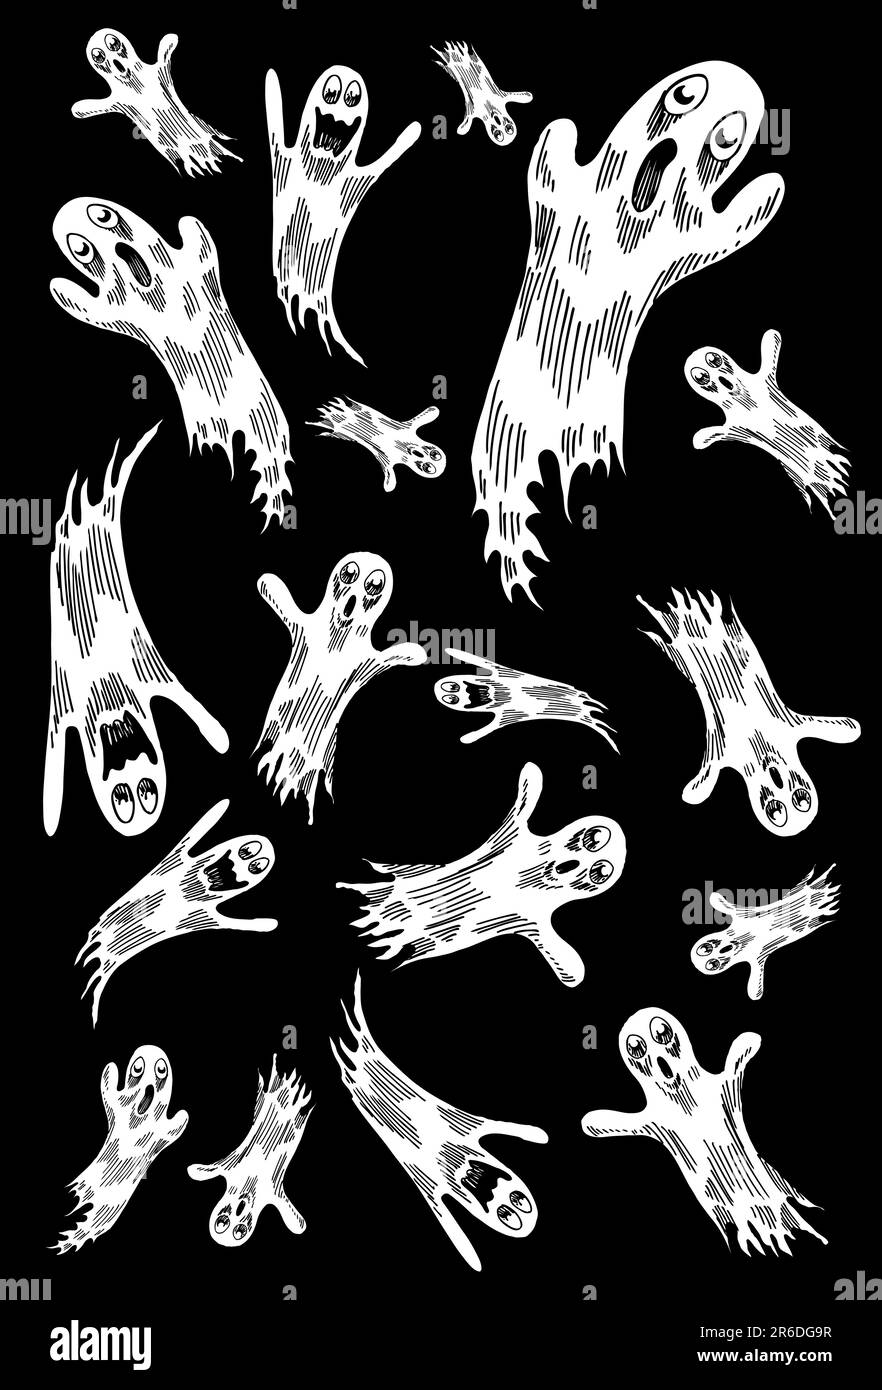 Halloween background of hand drawn flying ghosts. Stock Vector